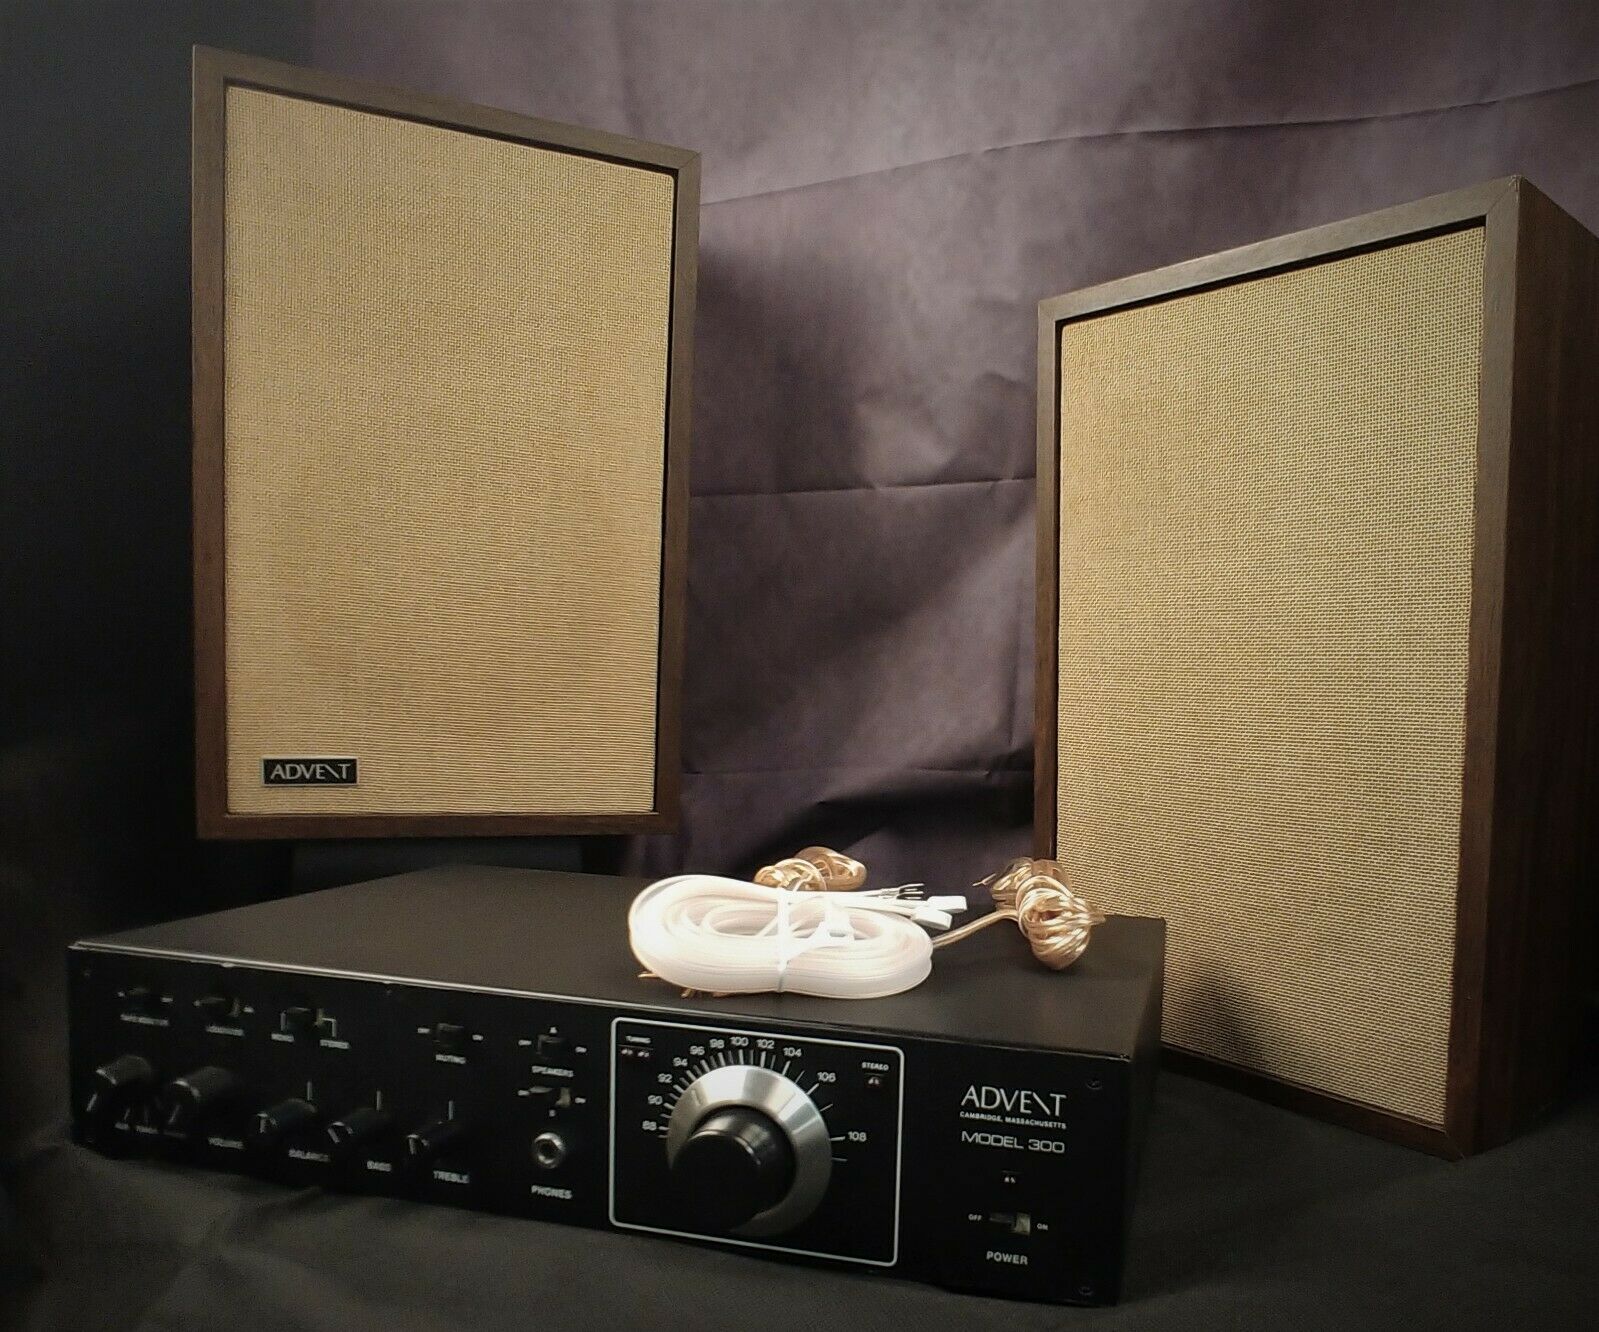 Advent 300 W/ Advent 3s - Complete 1980 Advent Hifi Tested - Time Capsule Hifi